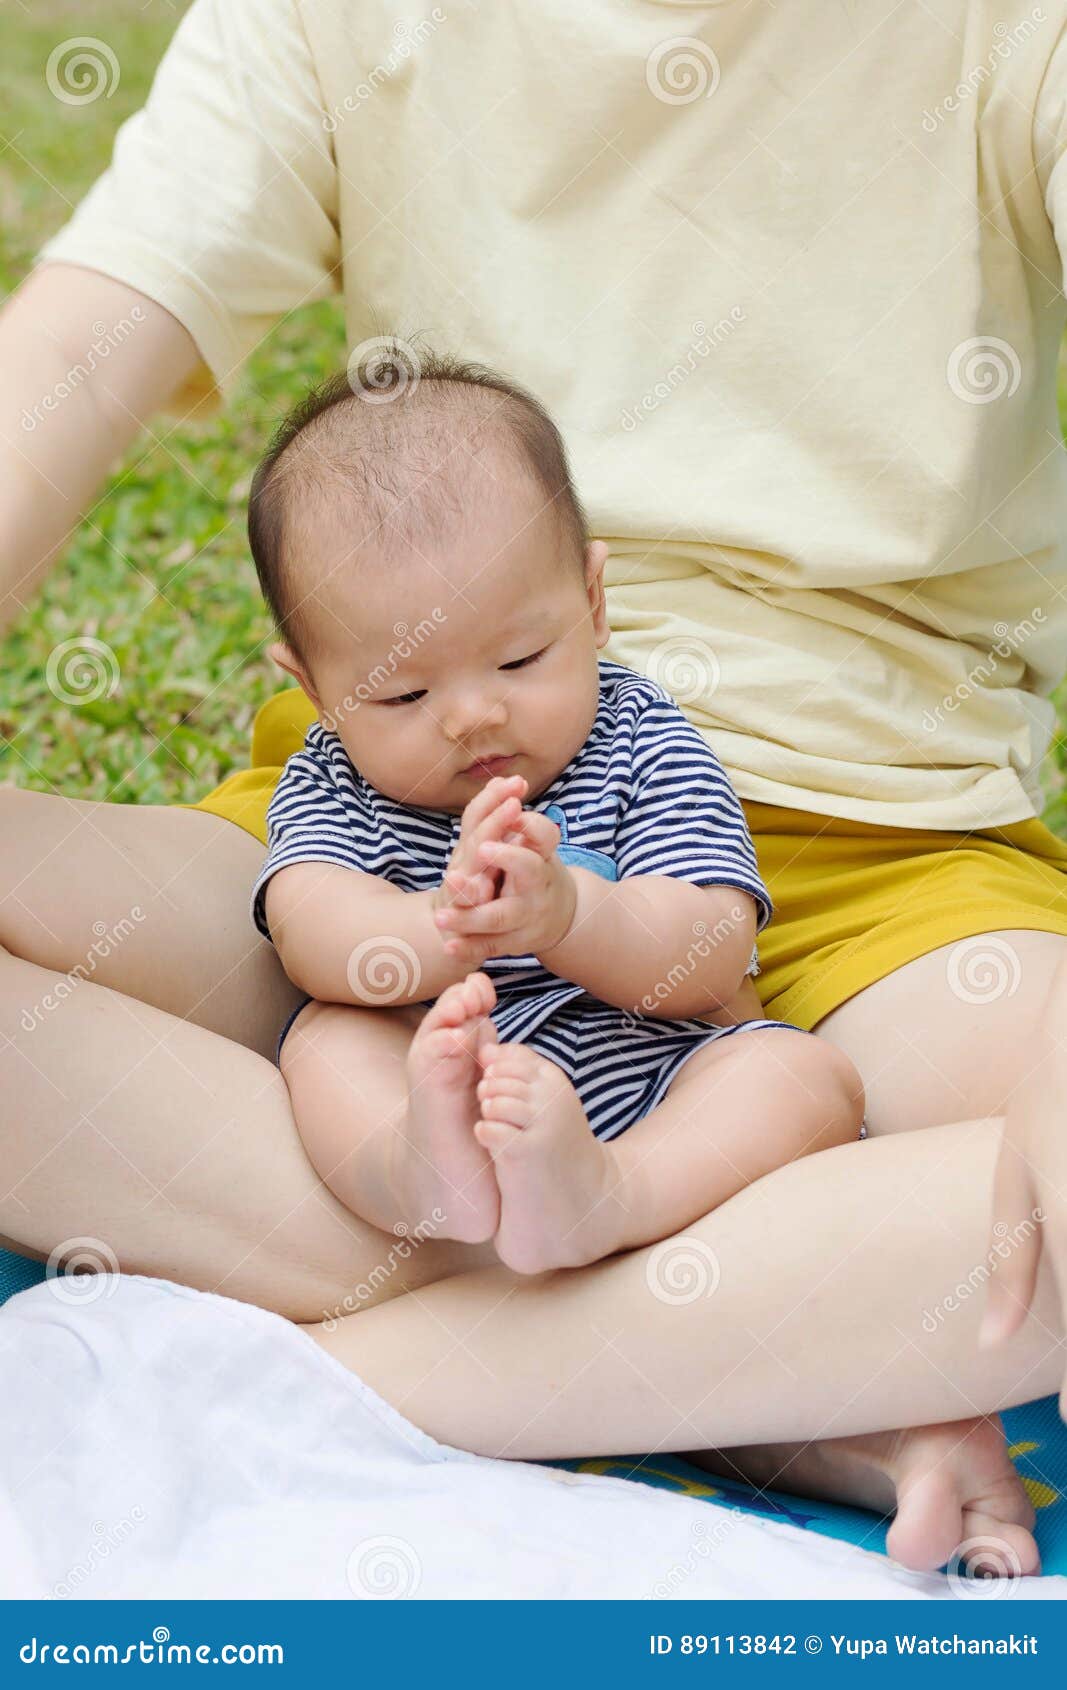 Asian Baby Enjoy Playing With He